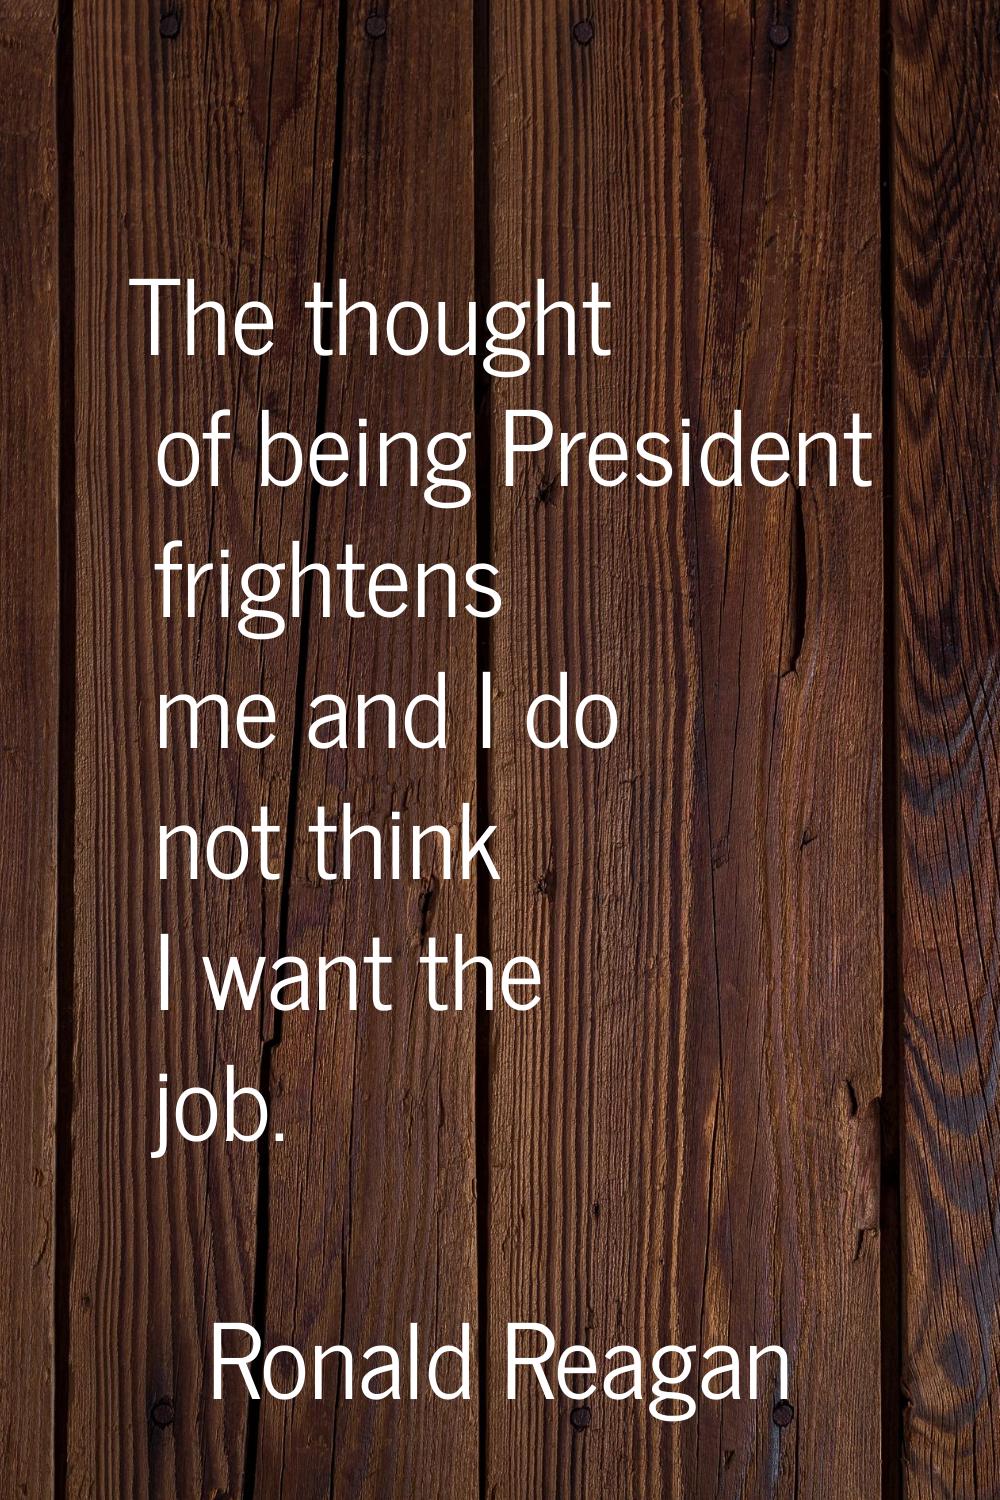 The thought of being President frightens me and I do not think I want the job.